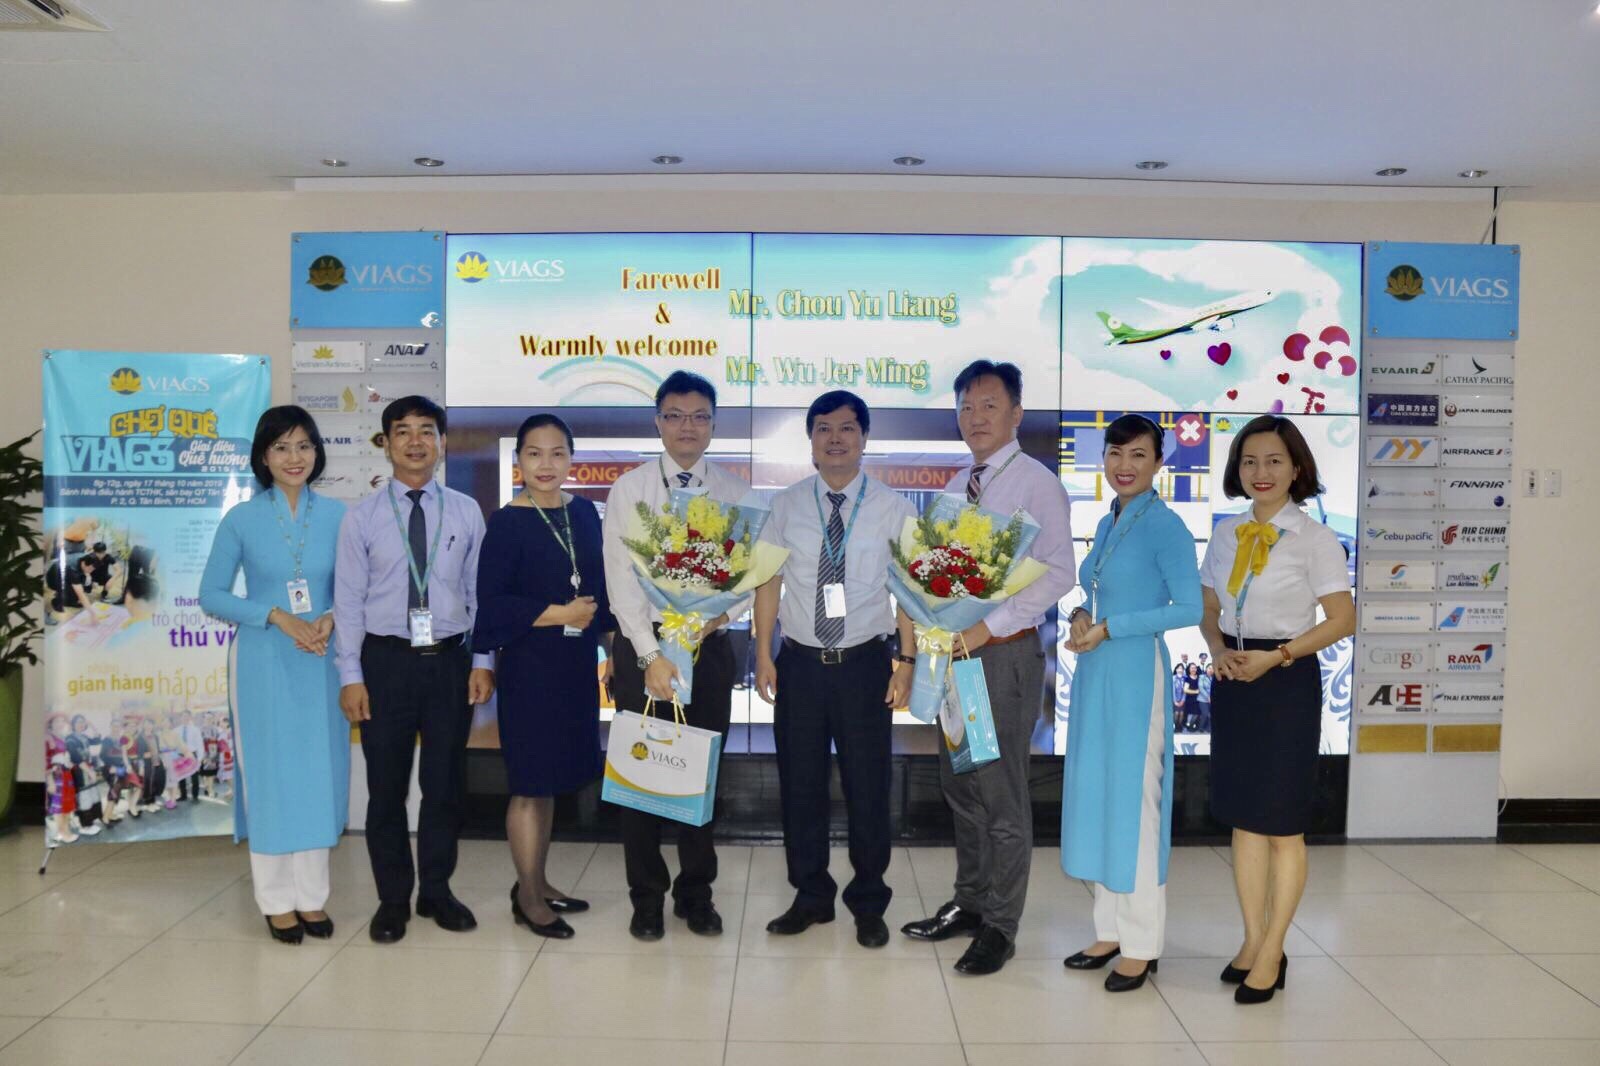 BOARD OF DIRECTORS OF VIAGS TAN SON NHAT WORKED WITH REPRESENTATIVE OF 5-STAR AIRLINE EVA AIR AT TAN SON NHAT AIRPORT